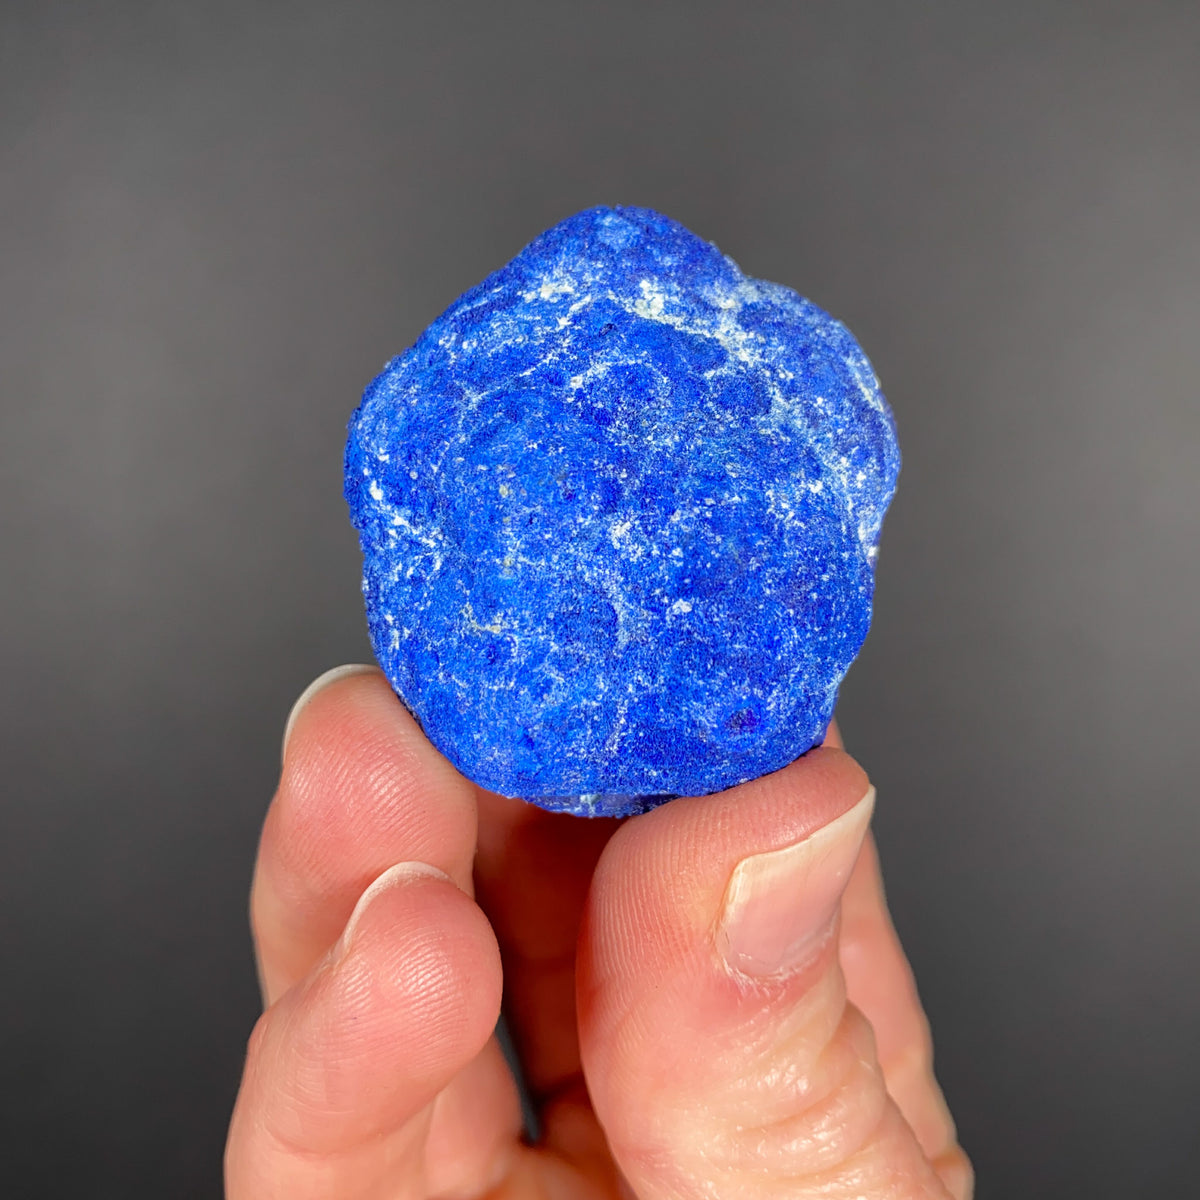 Exterior of an Azurite Geode or Blueberry from Russia